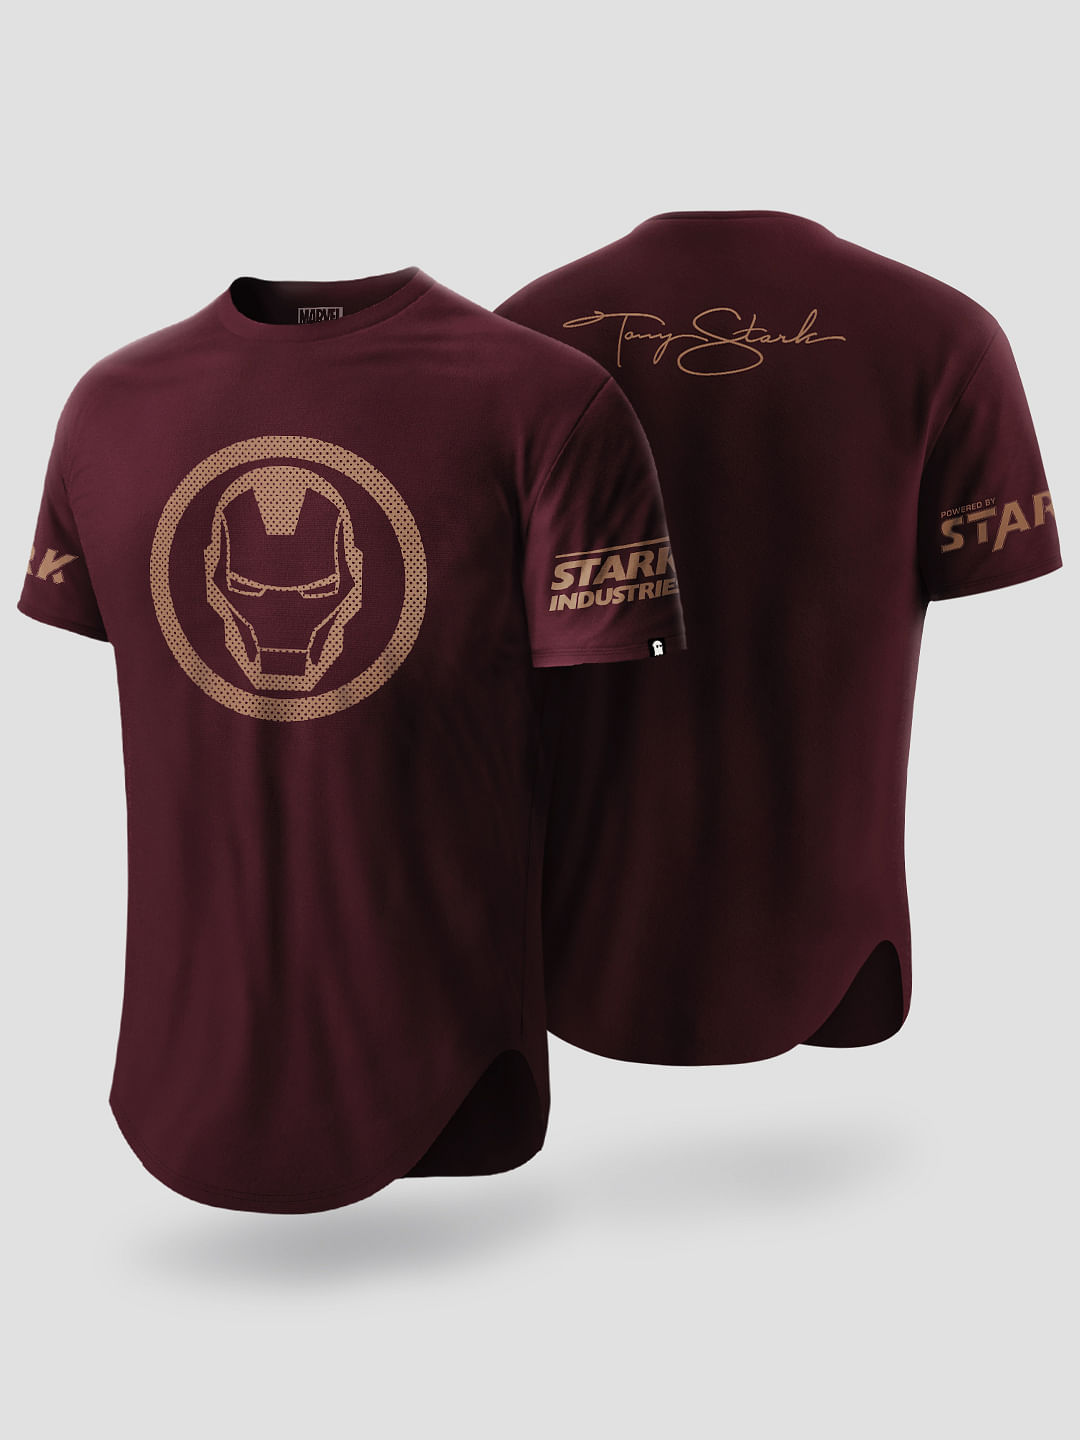 Buy Iron Man: Signature Stark Drop Cut T-shirts online at The Souled Store.